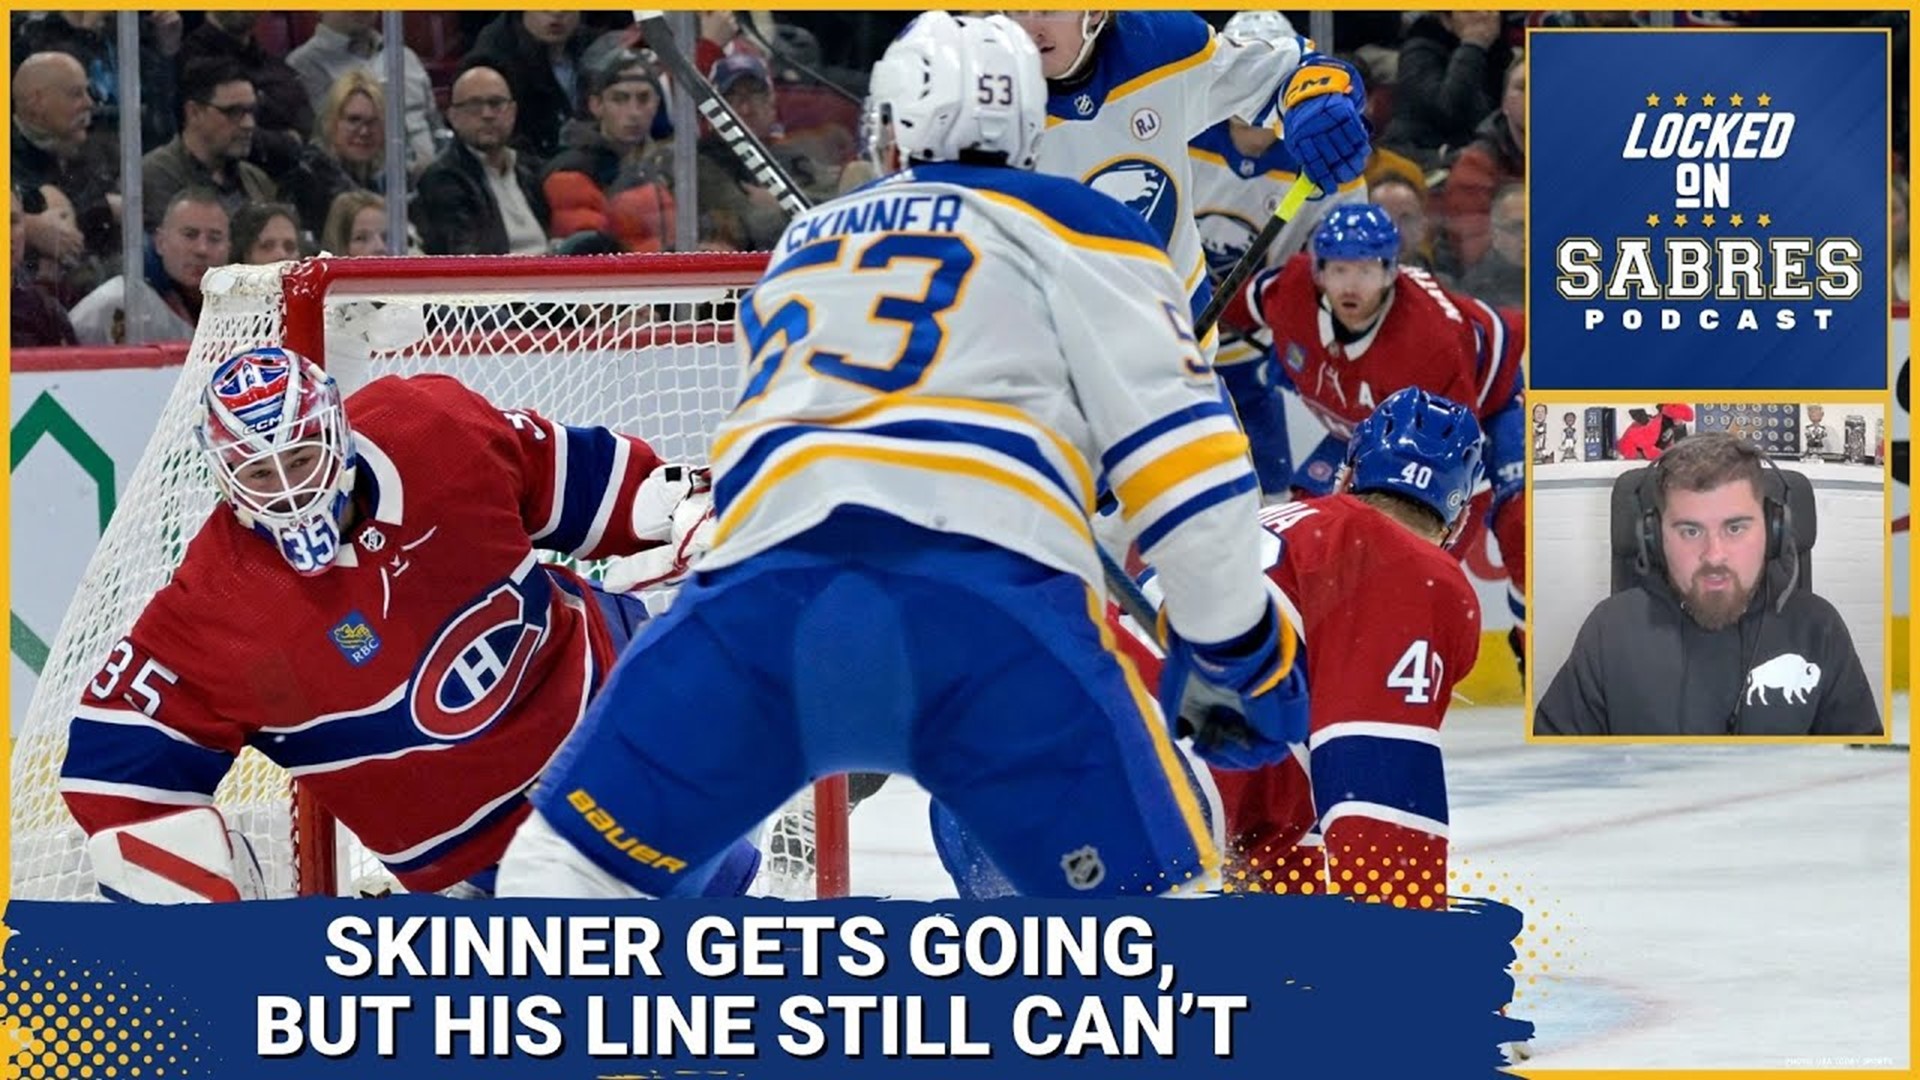 Jeff Skinner gets going in Montreal, but his line still can't